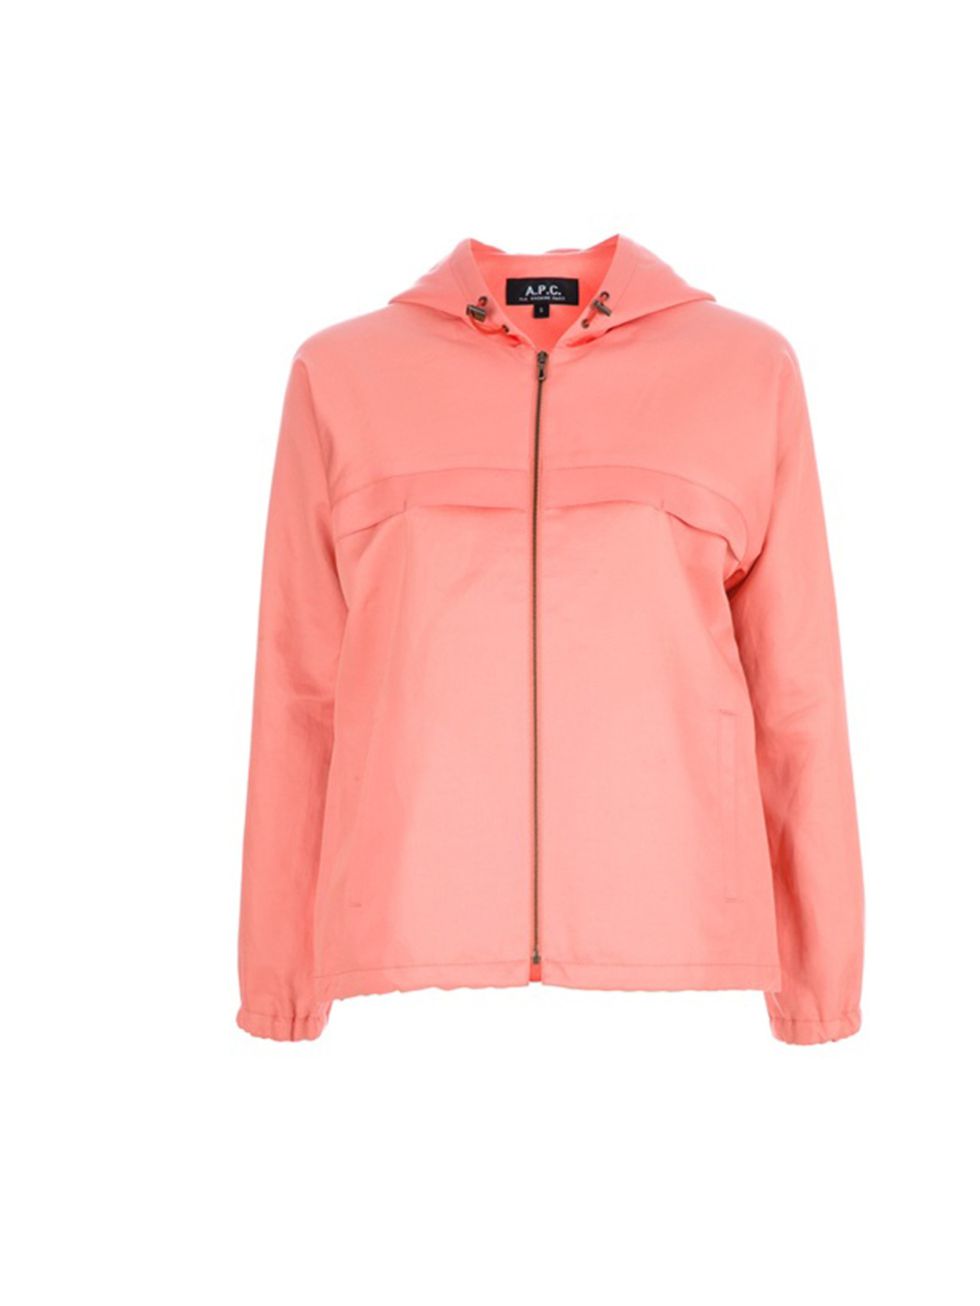 <p>A.P.C. coral hooded jacket, £244, at Farfetch</p><p><a href="http://shopping.elleuk.com/browse?fts=apc+coral+hooded+jacket">BUY NOW</a></p>